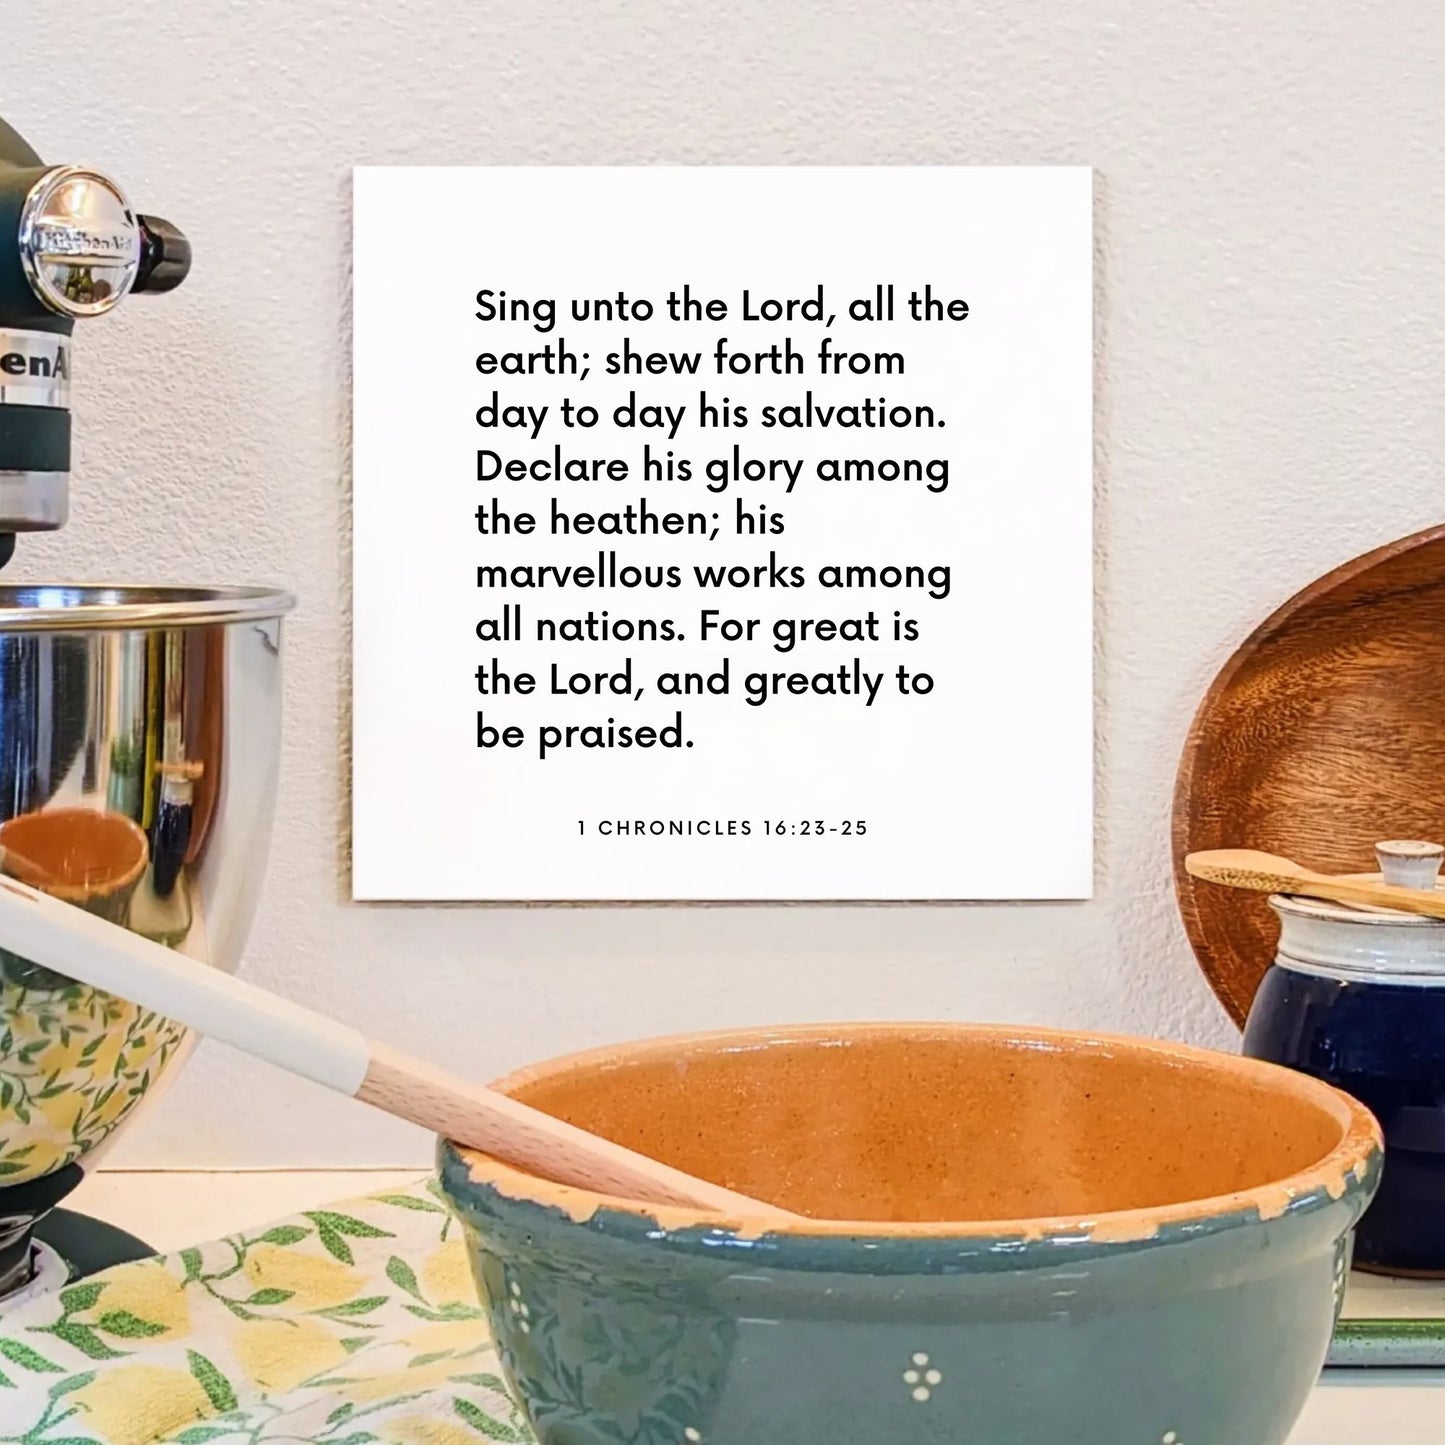 Kitchen mouting of the scripture tile for 1 Chronicles 16:23-25 - "Great is the Lord, and greatly to be praised"